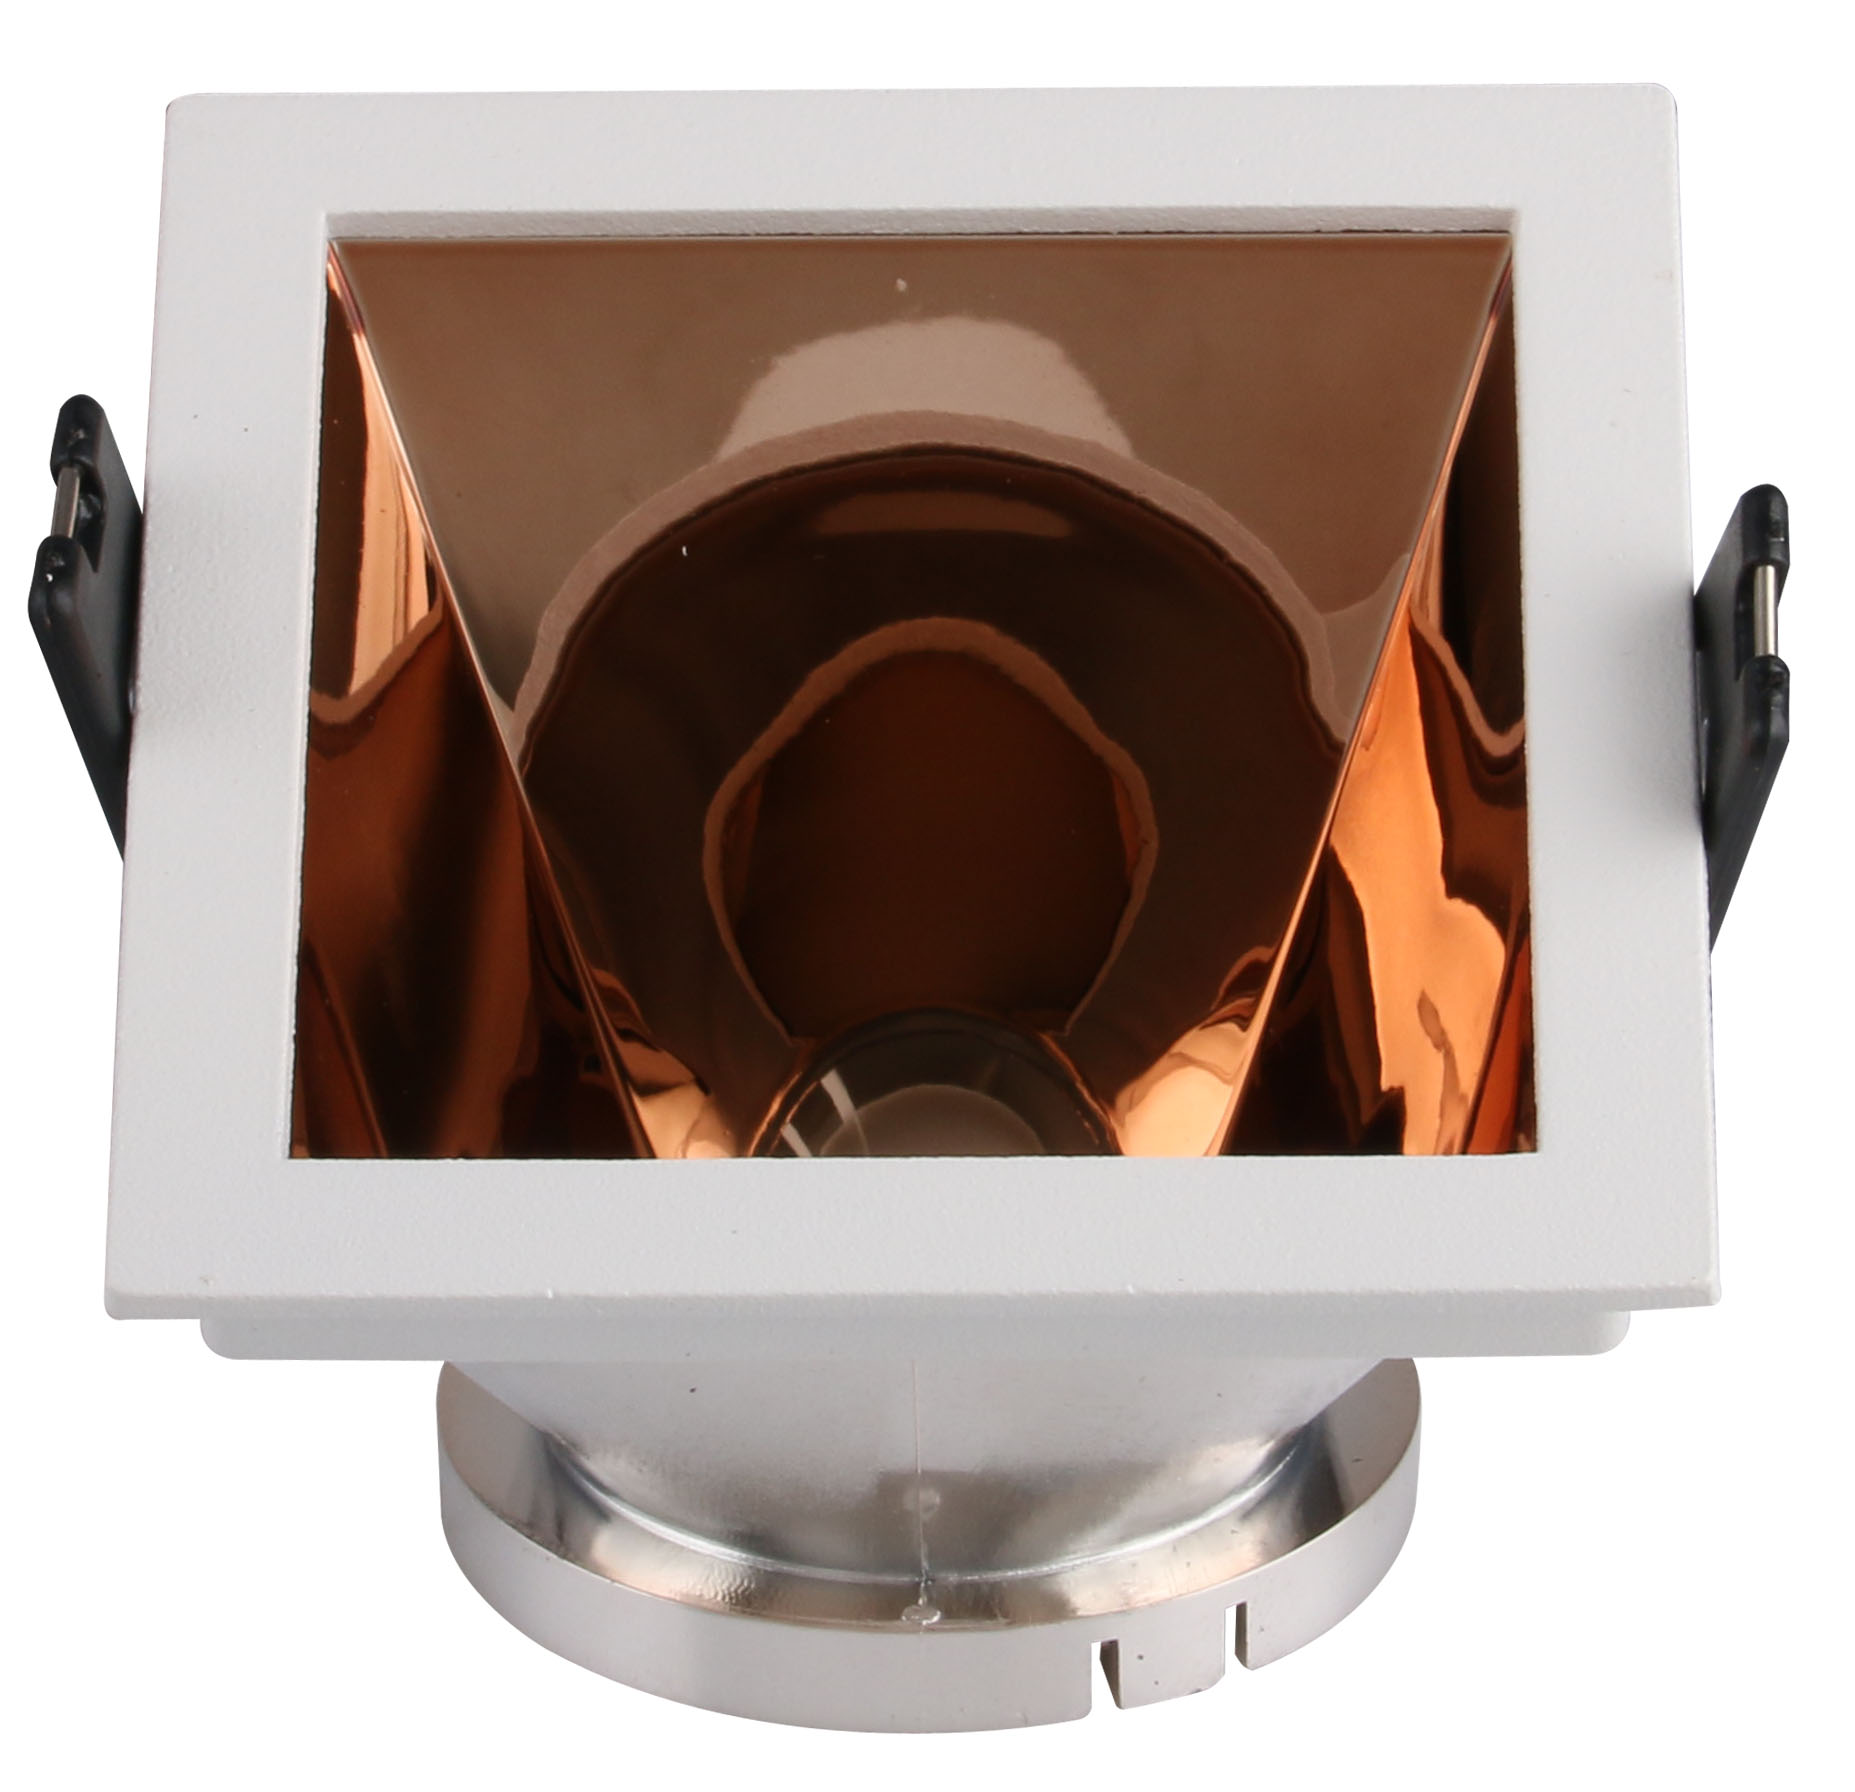 Recessed Commercial LED Downlight Fixture External LED Downlight Fixture 